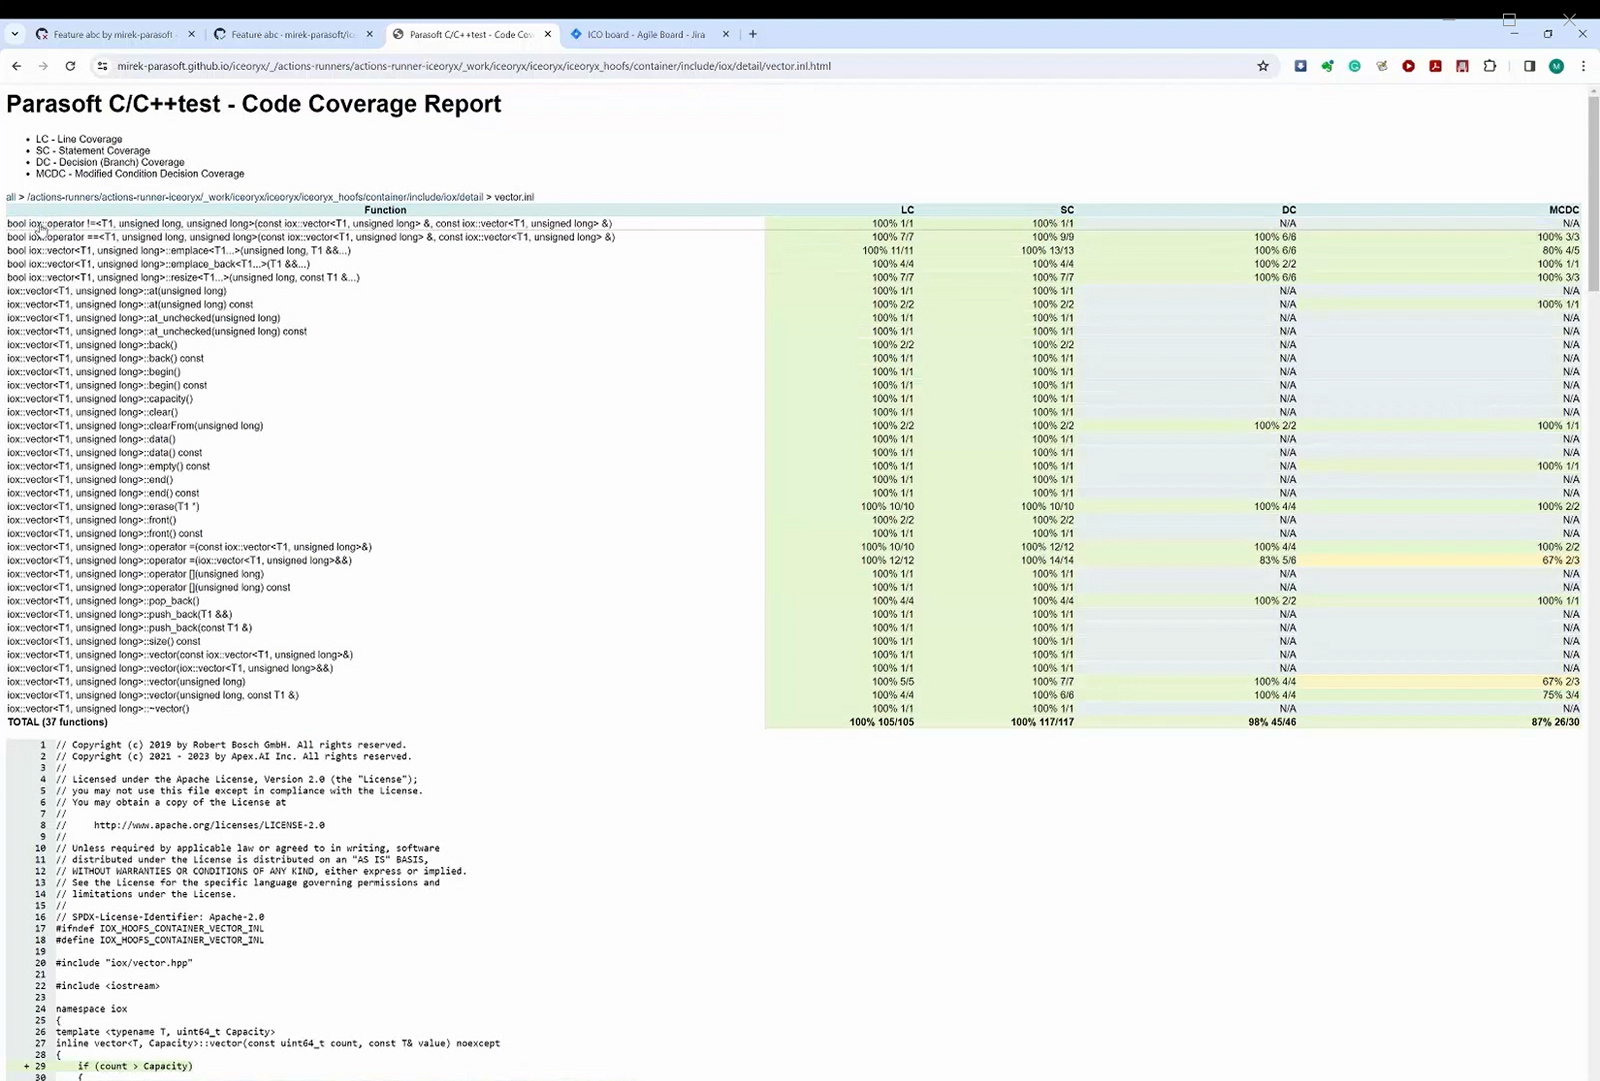 Screenshot of a code coverage report in GitHubPages produced by C/C++test CT.